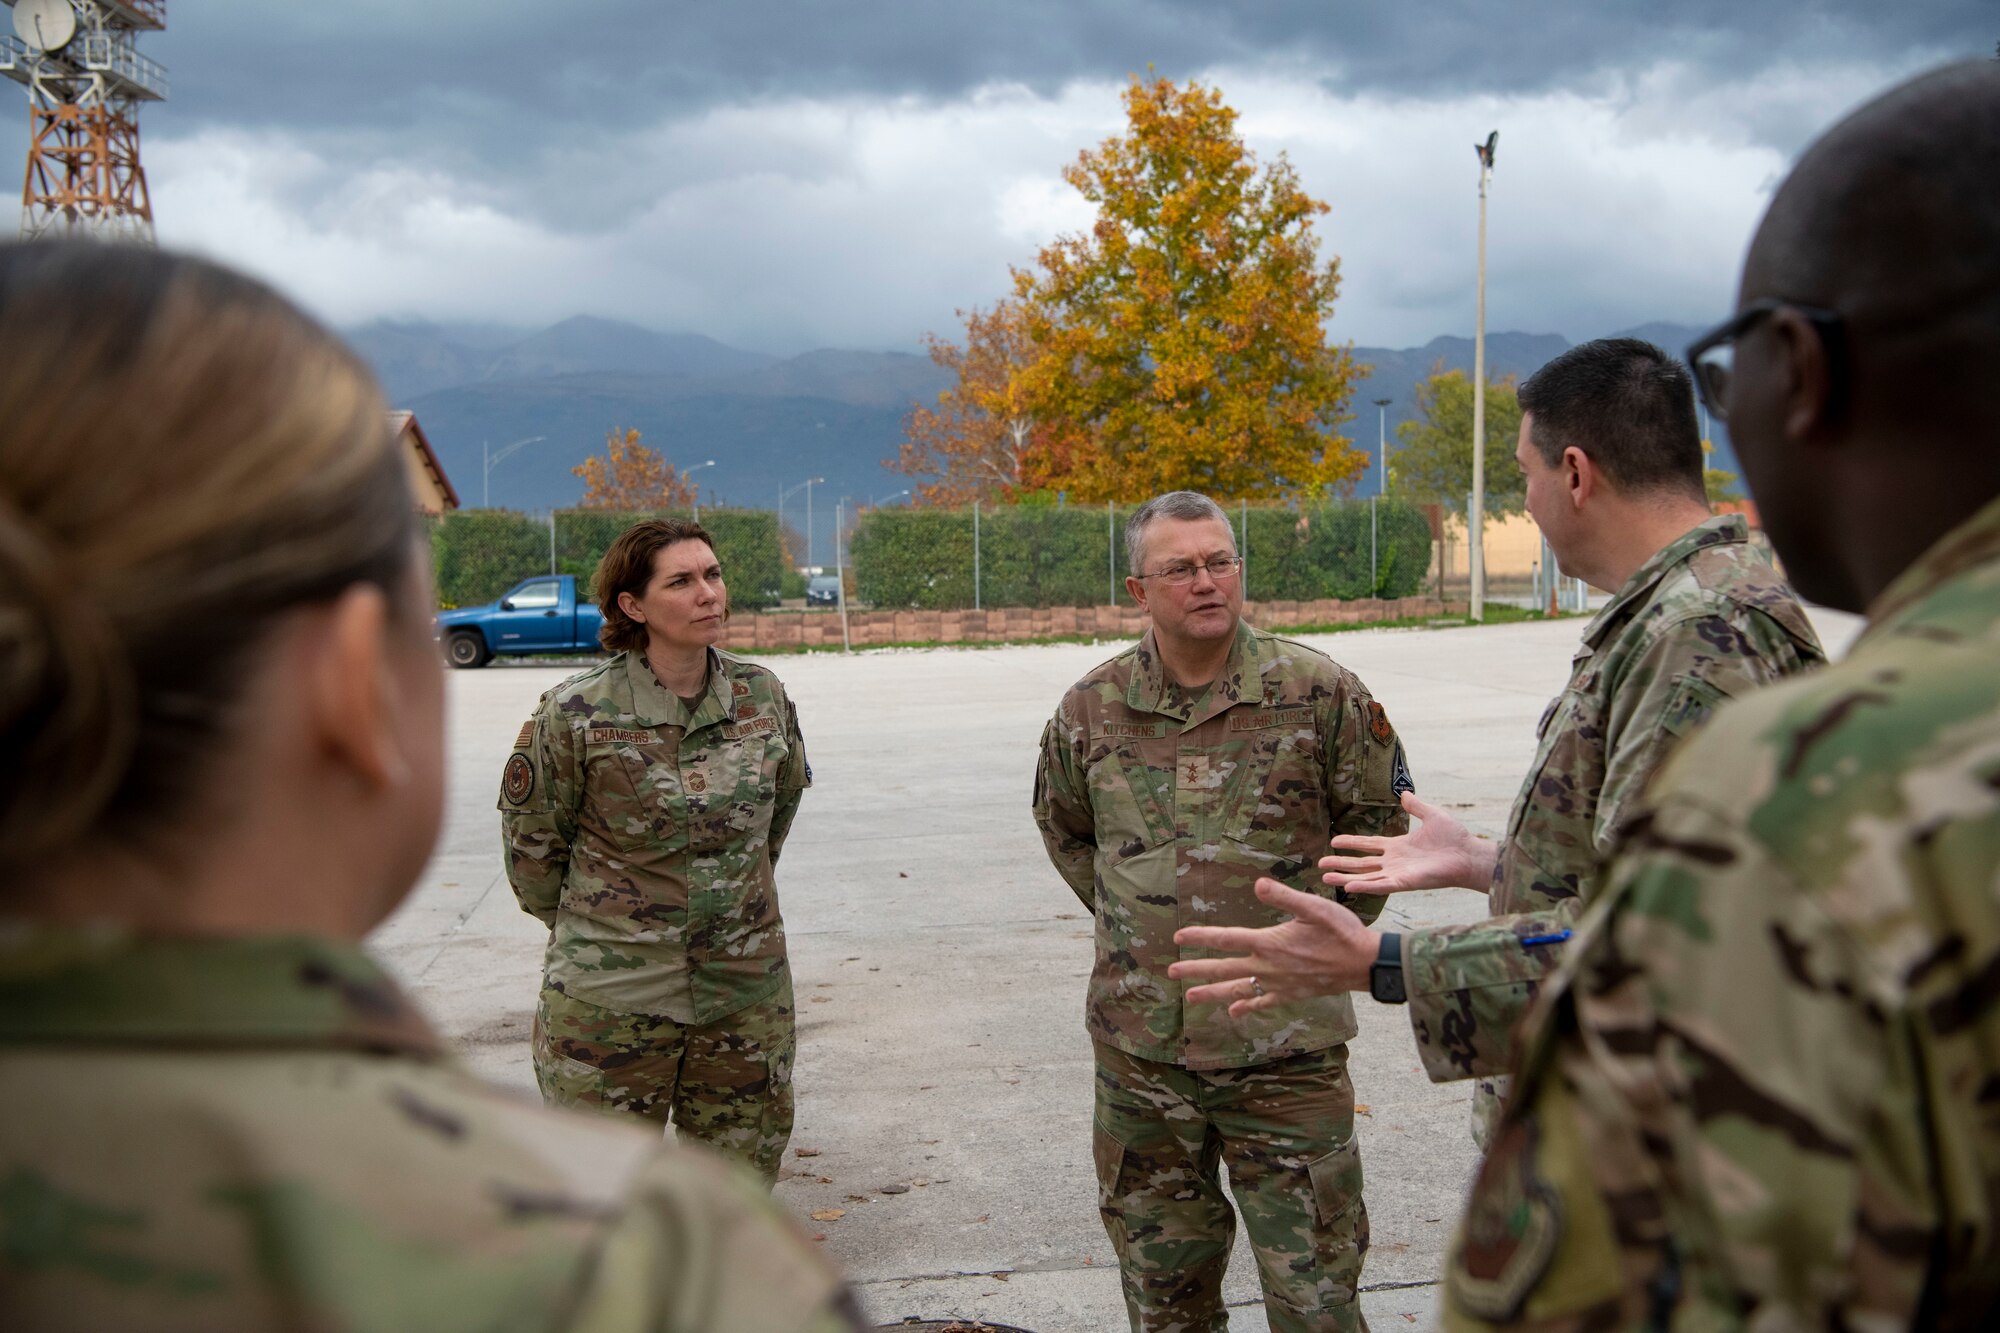 Chaplain (Maj. Gen.) Randall Kitchens, U.S. Air Force chief of chaplains, middle, and Chief Master Sgt. Sadie Chambers, U.S. Air Force religious affairs career field manager, left, are briefed by Lt Col. Joseph Faraone, 606th Air Combat Squadron commander, right, at Aviano Air Base, Italy, Nov. 18, 2022. Faraone explained the 606th ACS leadership’s prioritization of creating a positive, safe environment for Airmen’s well-being and morale. (U.S. Air Force photo by Airman 1st Class Thomas Calopedis)